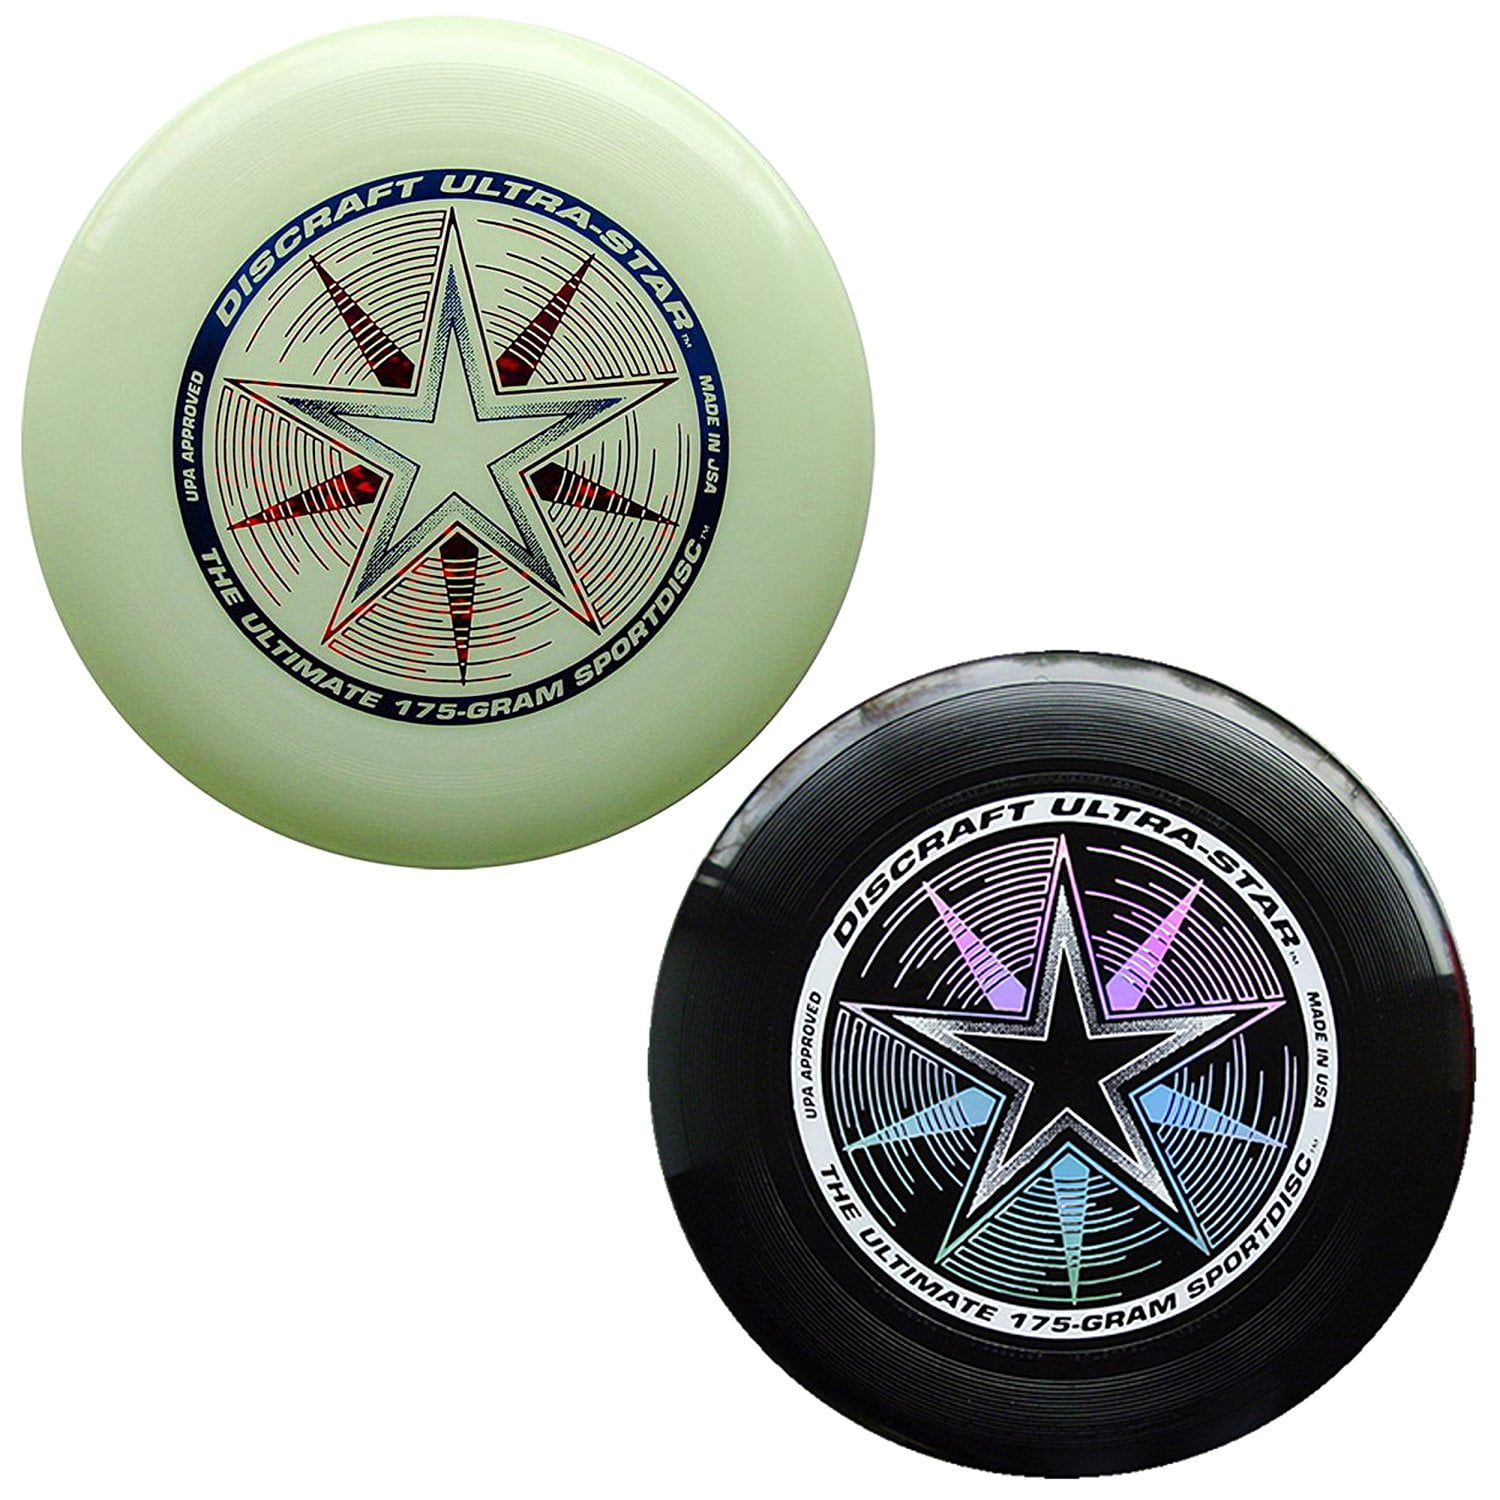 DISCRAFT ULTRA-STAR ULTIMATE DISC WHITE COMPETITION STANDARD 175g REGULATION 